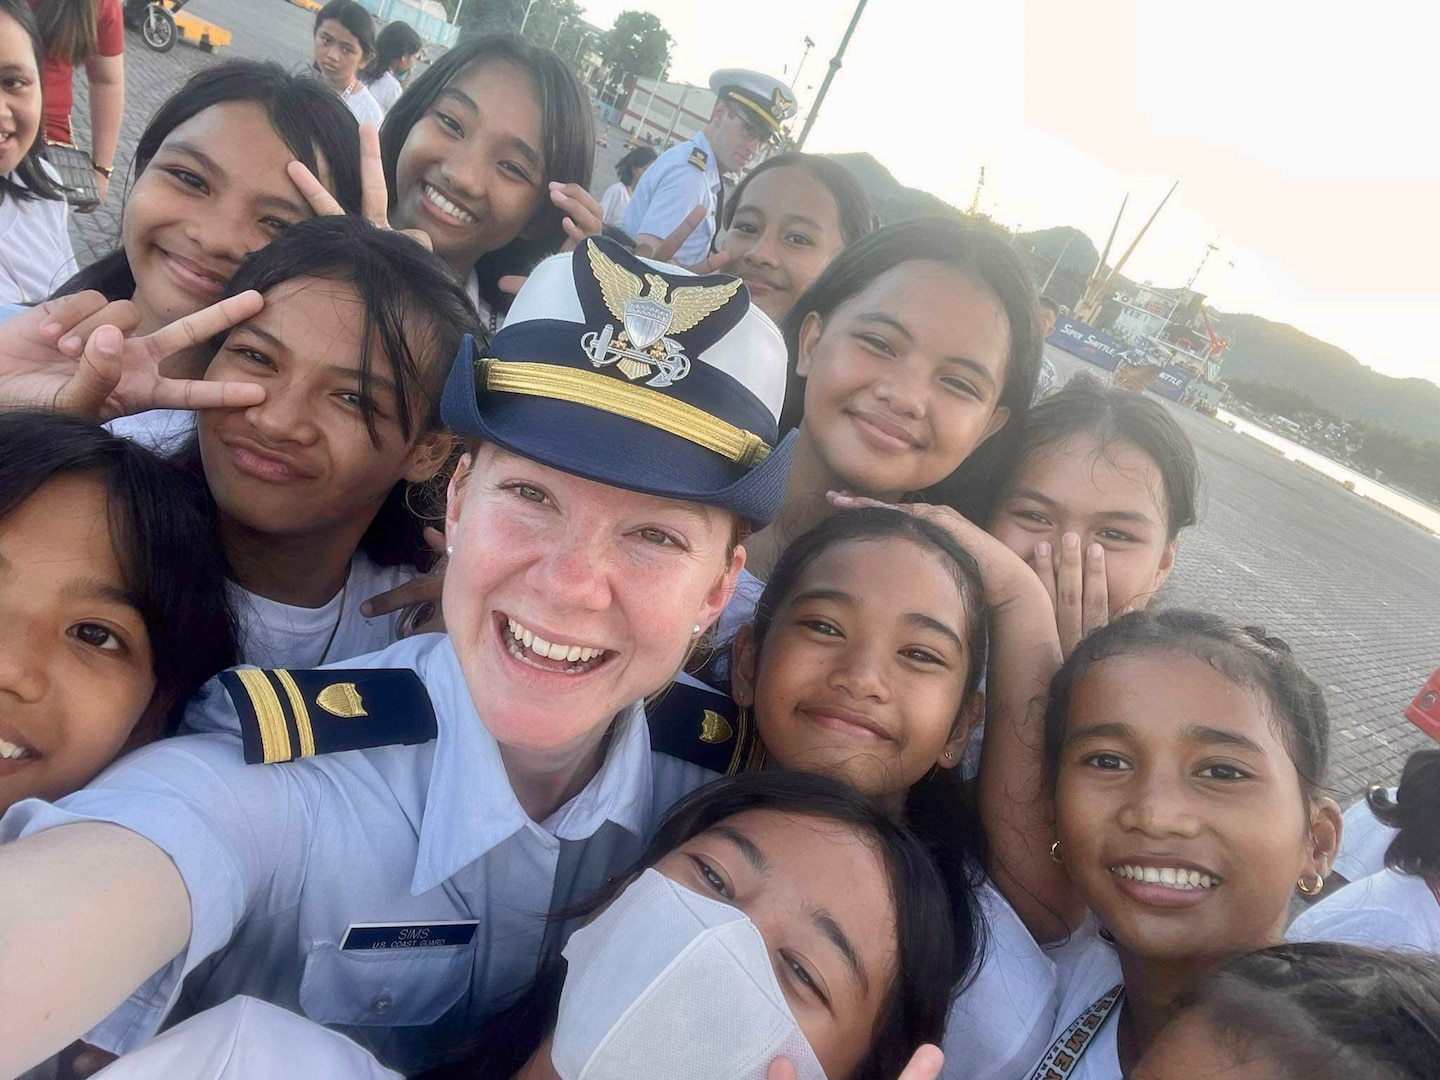 Lt. j.g. Mary Sims, executive officer of USCGC Frederick Hatch (WPC 1143), takes a photo with students touring the ship at the pier in Tacloban, Philippines, on Oct. 21, 2023. In a historic first, the USCGC Frederick Hatch (WPC 1143) visited Tacloban, Philippines, from Oct. 19 to 23, 2023, and the crew conducted engagements marking a significant milestone in the enduring relationship between the United States and the Philippines. (U.S. Coast Guard photo by Lt. j.g. Mary Sims)